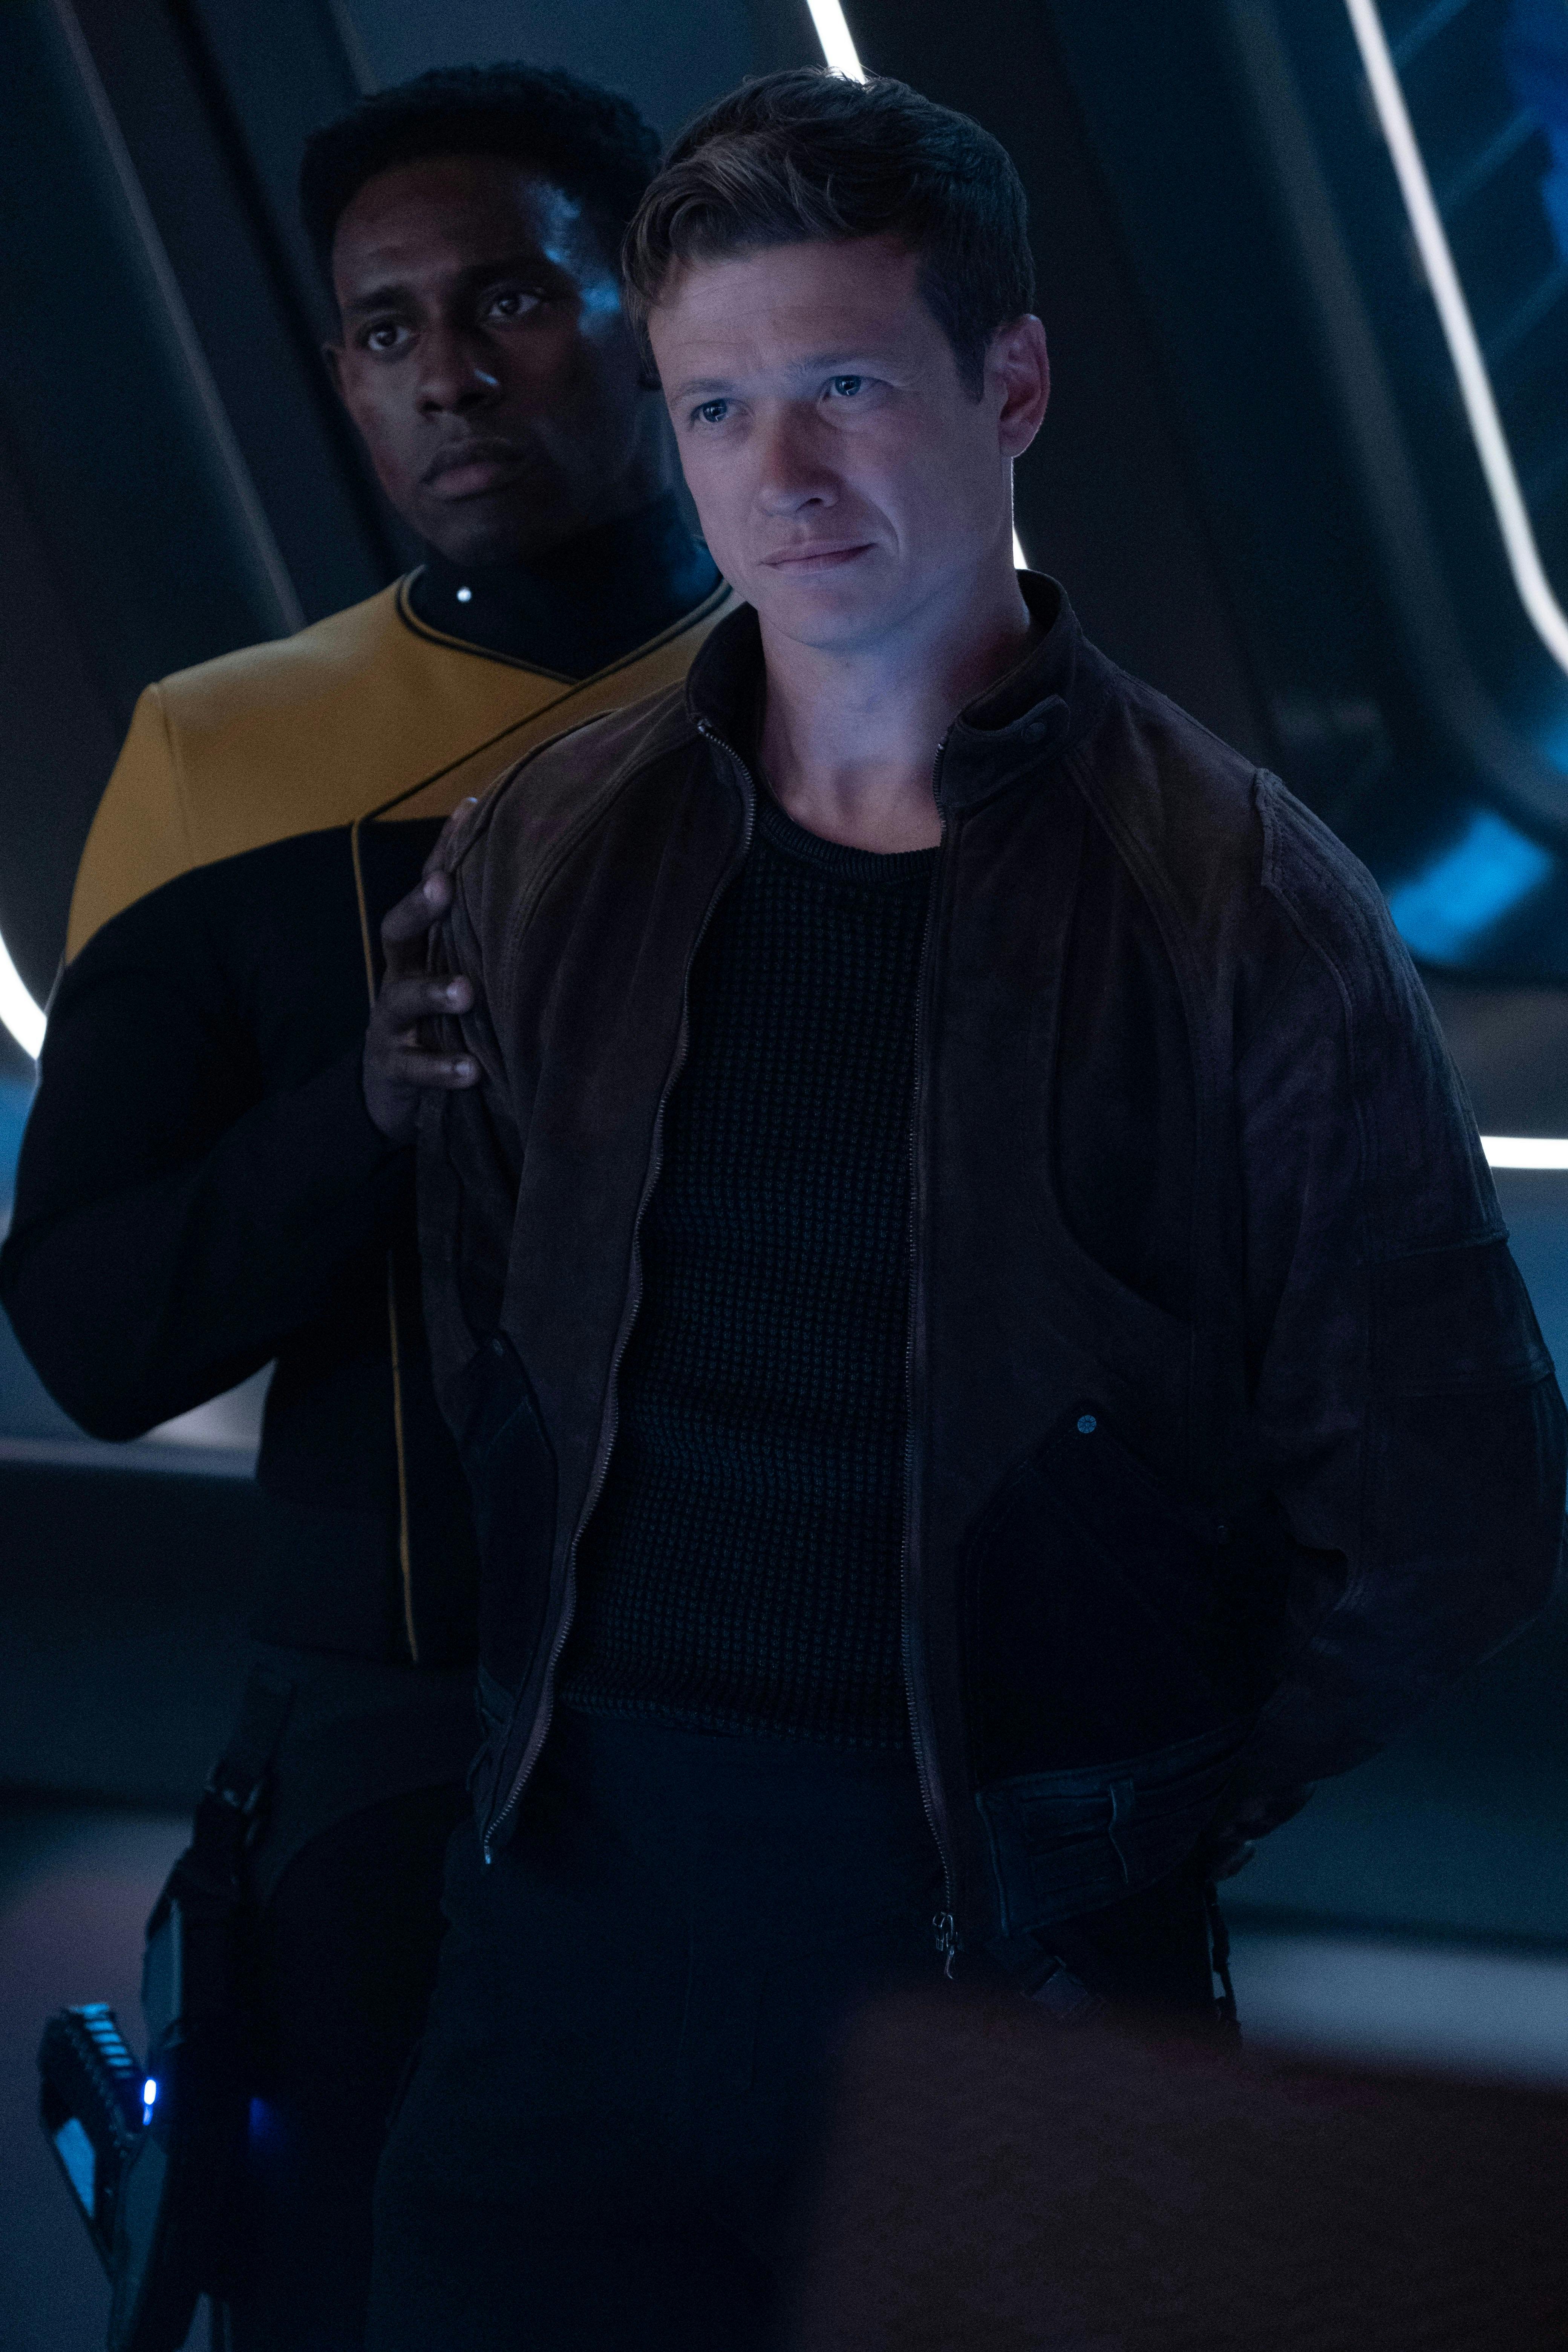 Jack Crusher is detained by security on Star Trek: Picard